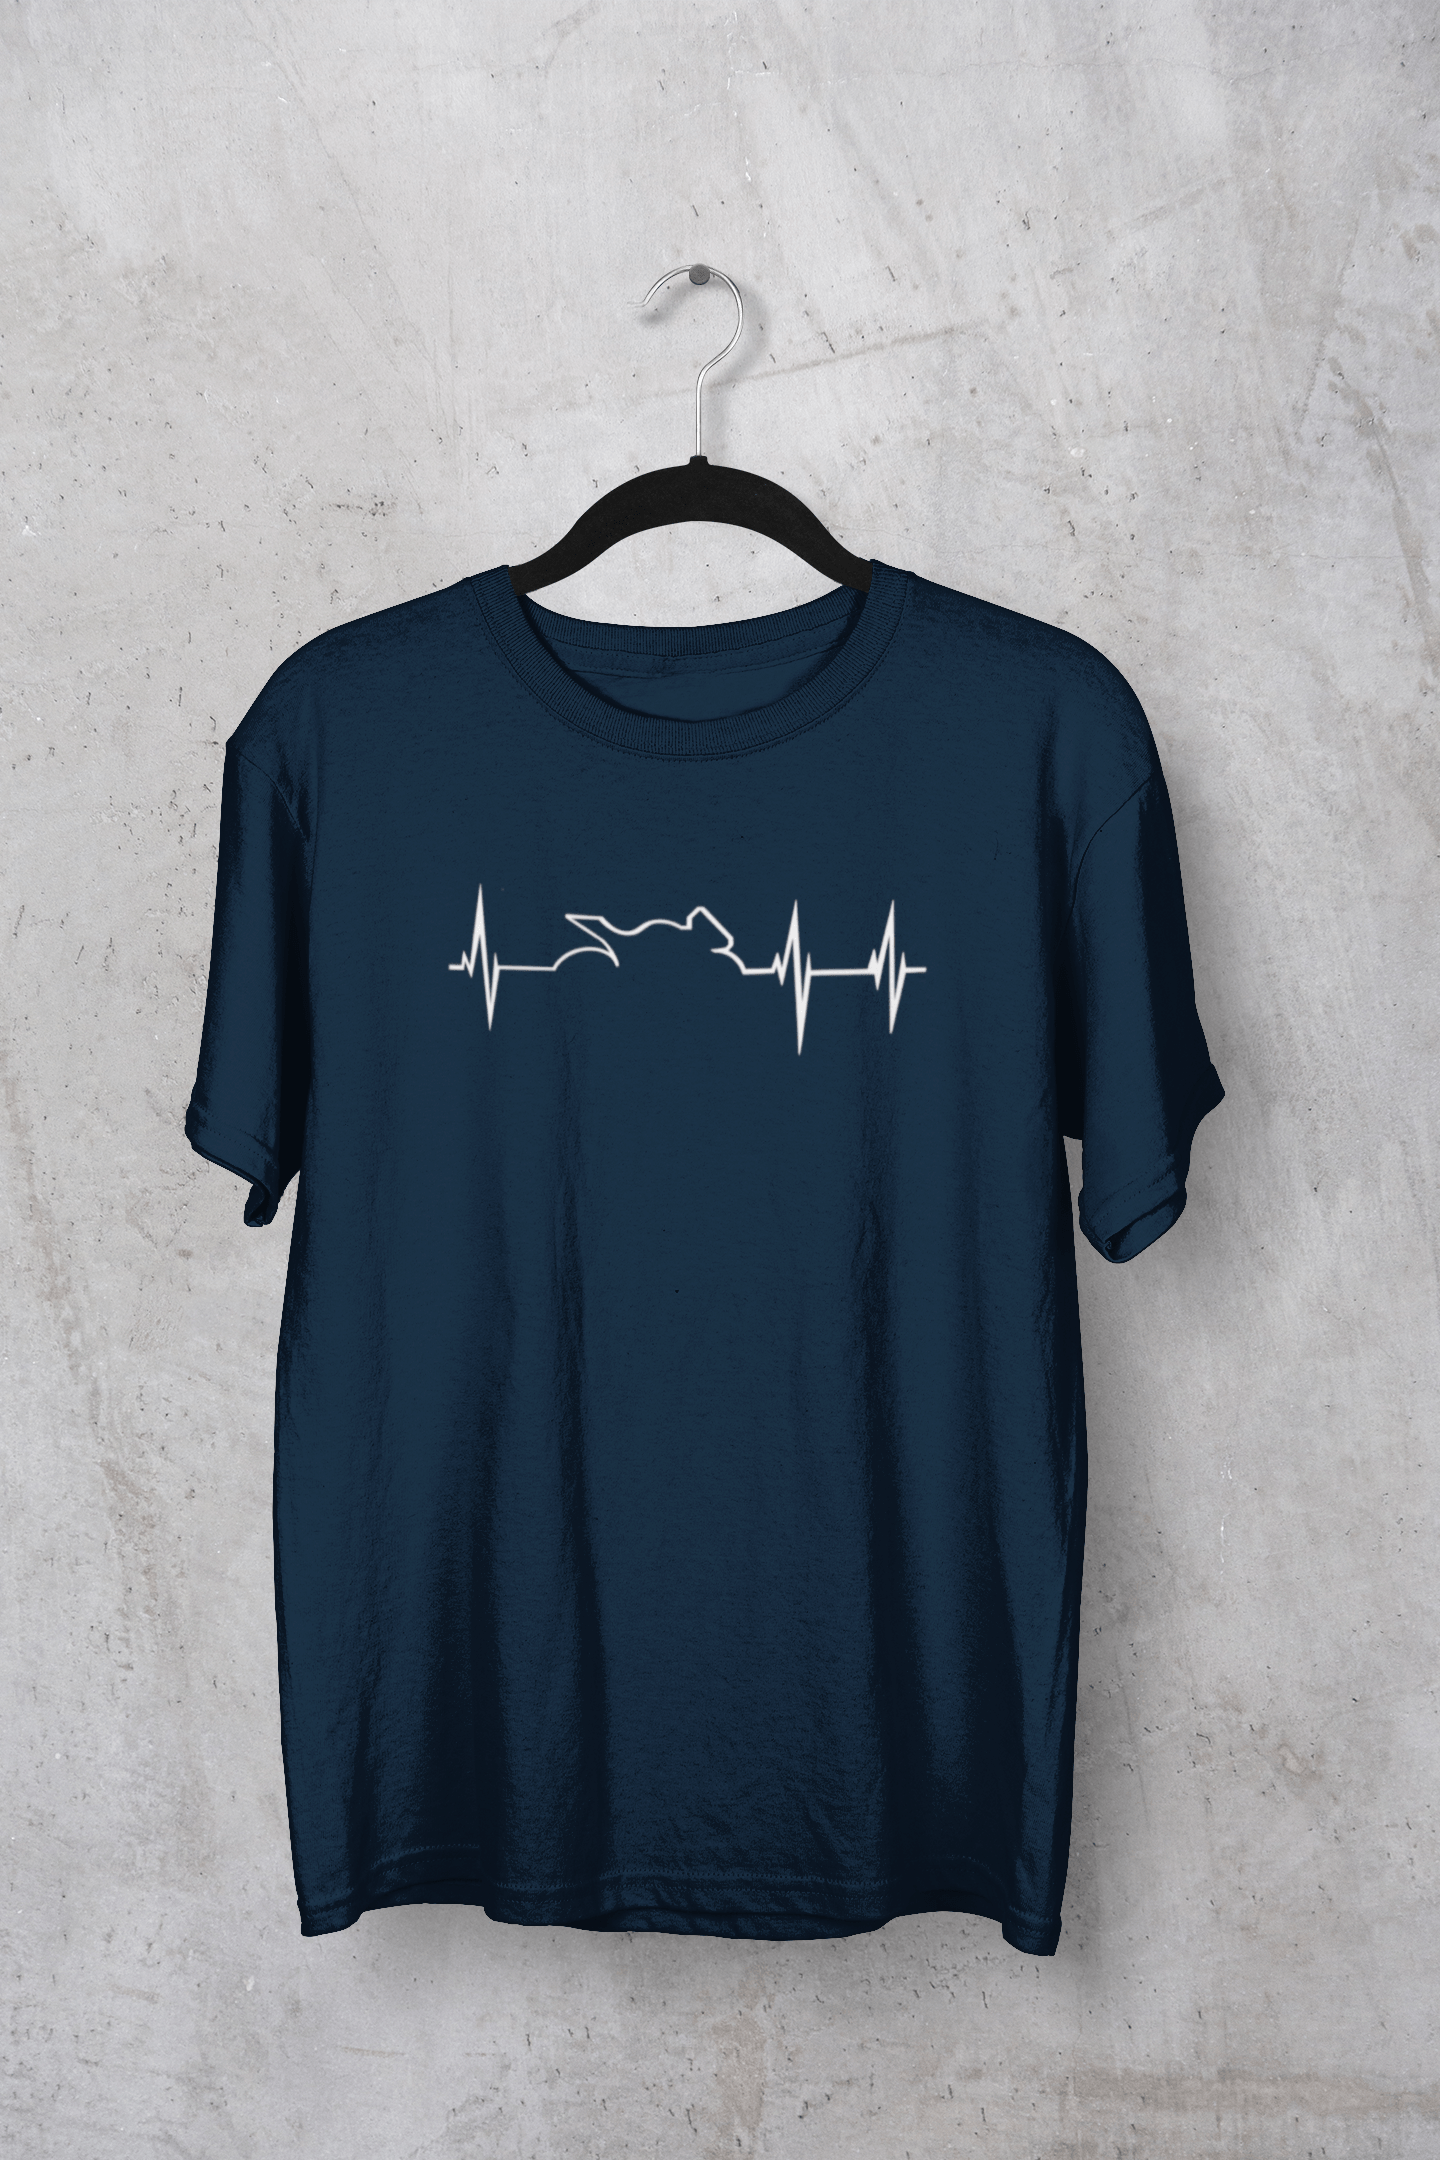 " Heartbeat pulse with motorcycle " HALF-SLEEVE T-SHIRTS NAVY BLUE